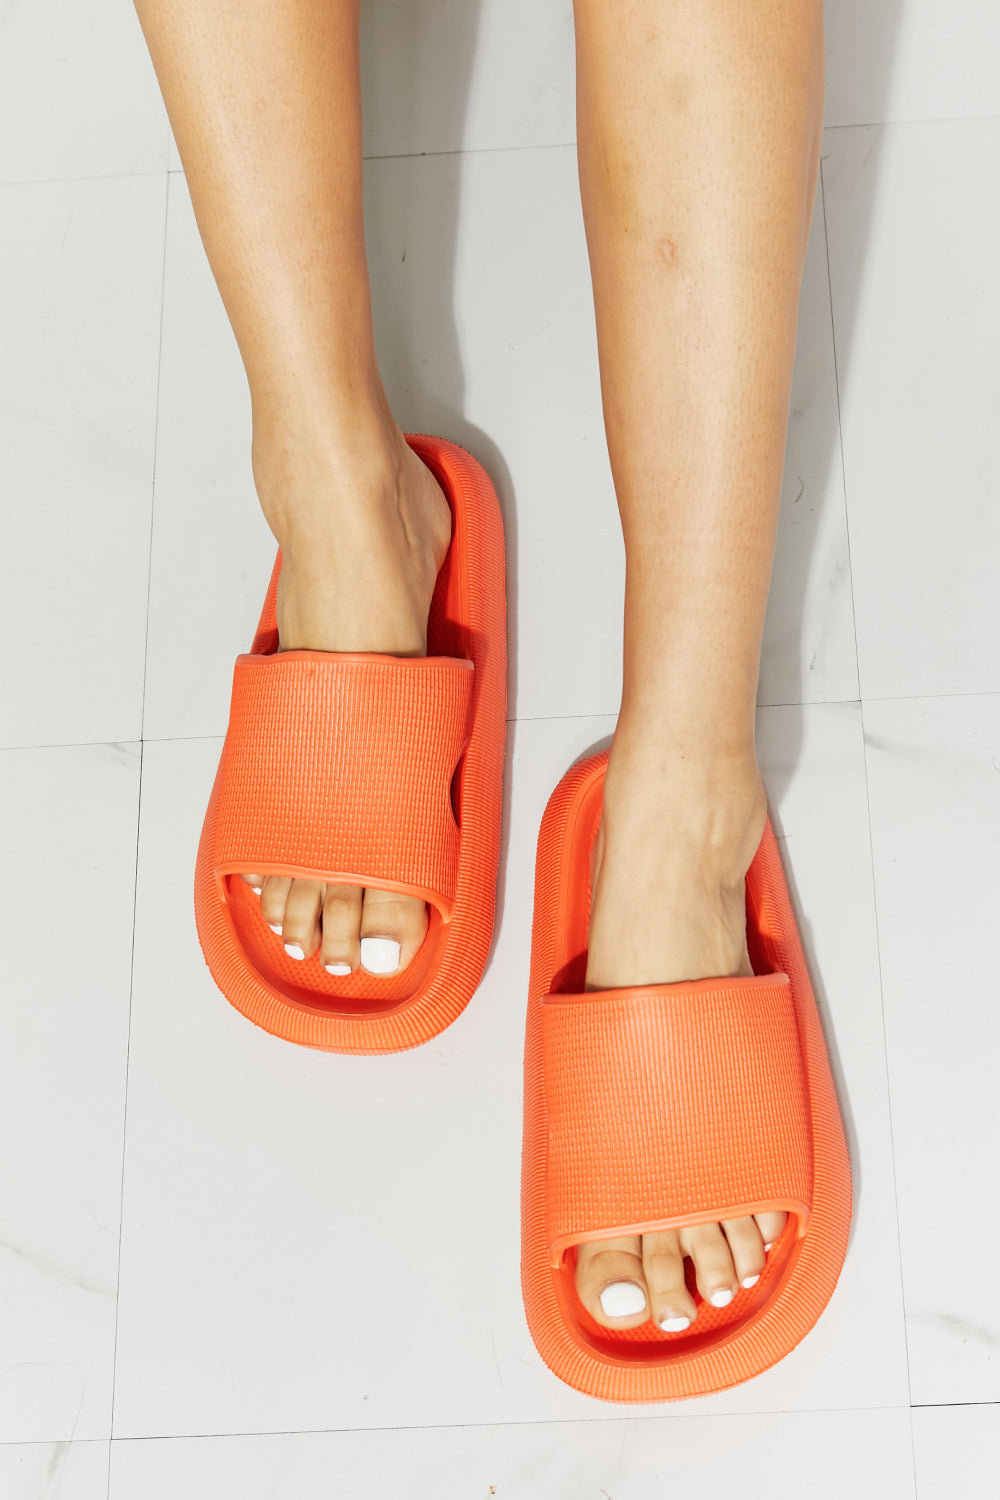 ORANGE - MMShoes Arms Around Me Open Toe Slide in Orange - Ships from The US - womens slides at TFC&H Co.